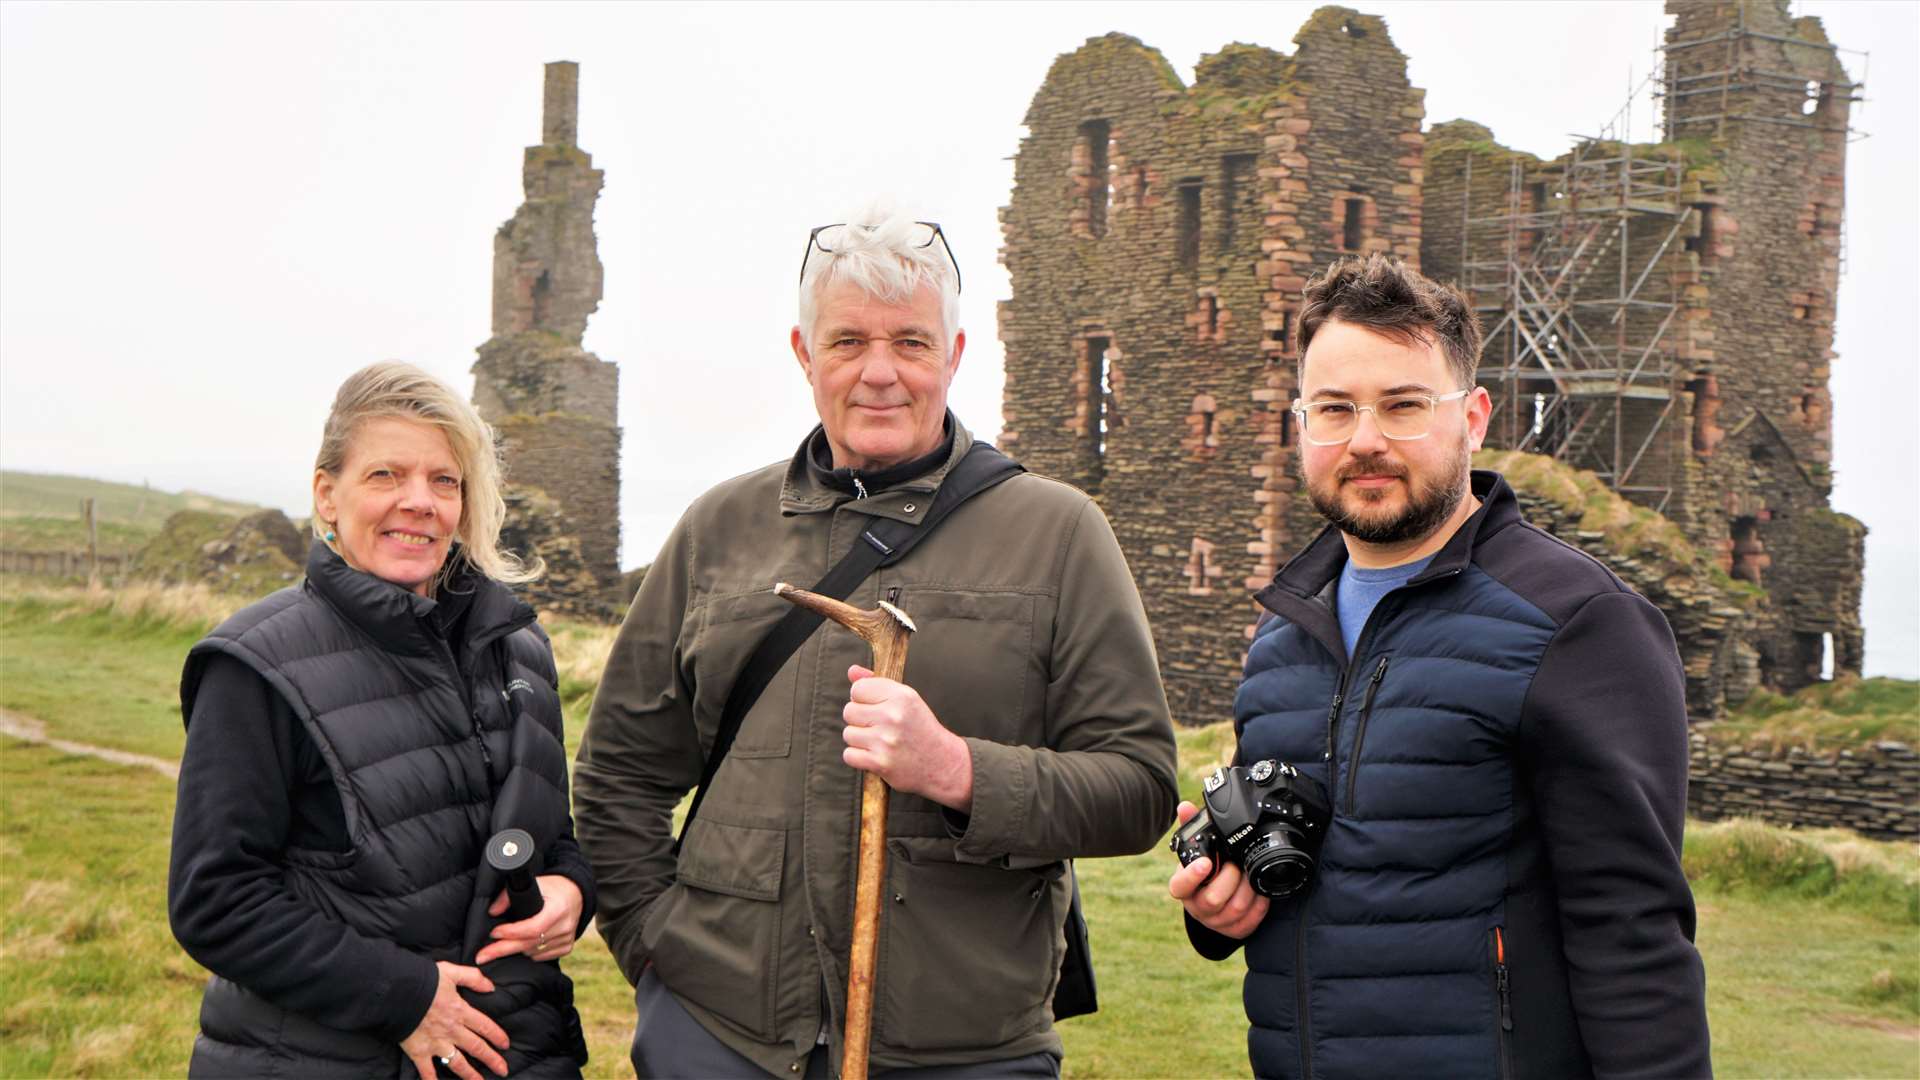 From left, production coordinator Lois Stevenson from Pathway, author Shawn Williamson who wrote Questus and Nathan Newman who is co-founder of Pathway. They are pictured at Sinclair-Girnigoe Castle on a recent recce trip. Picture: DGS